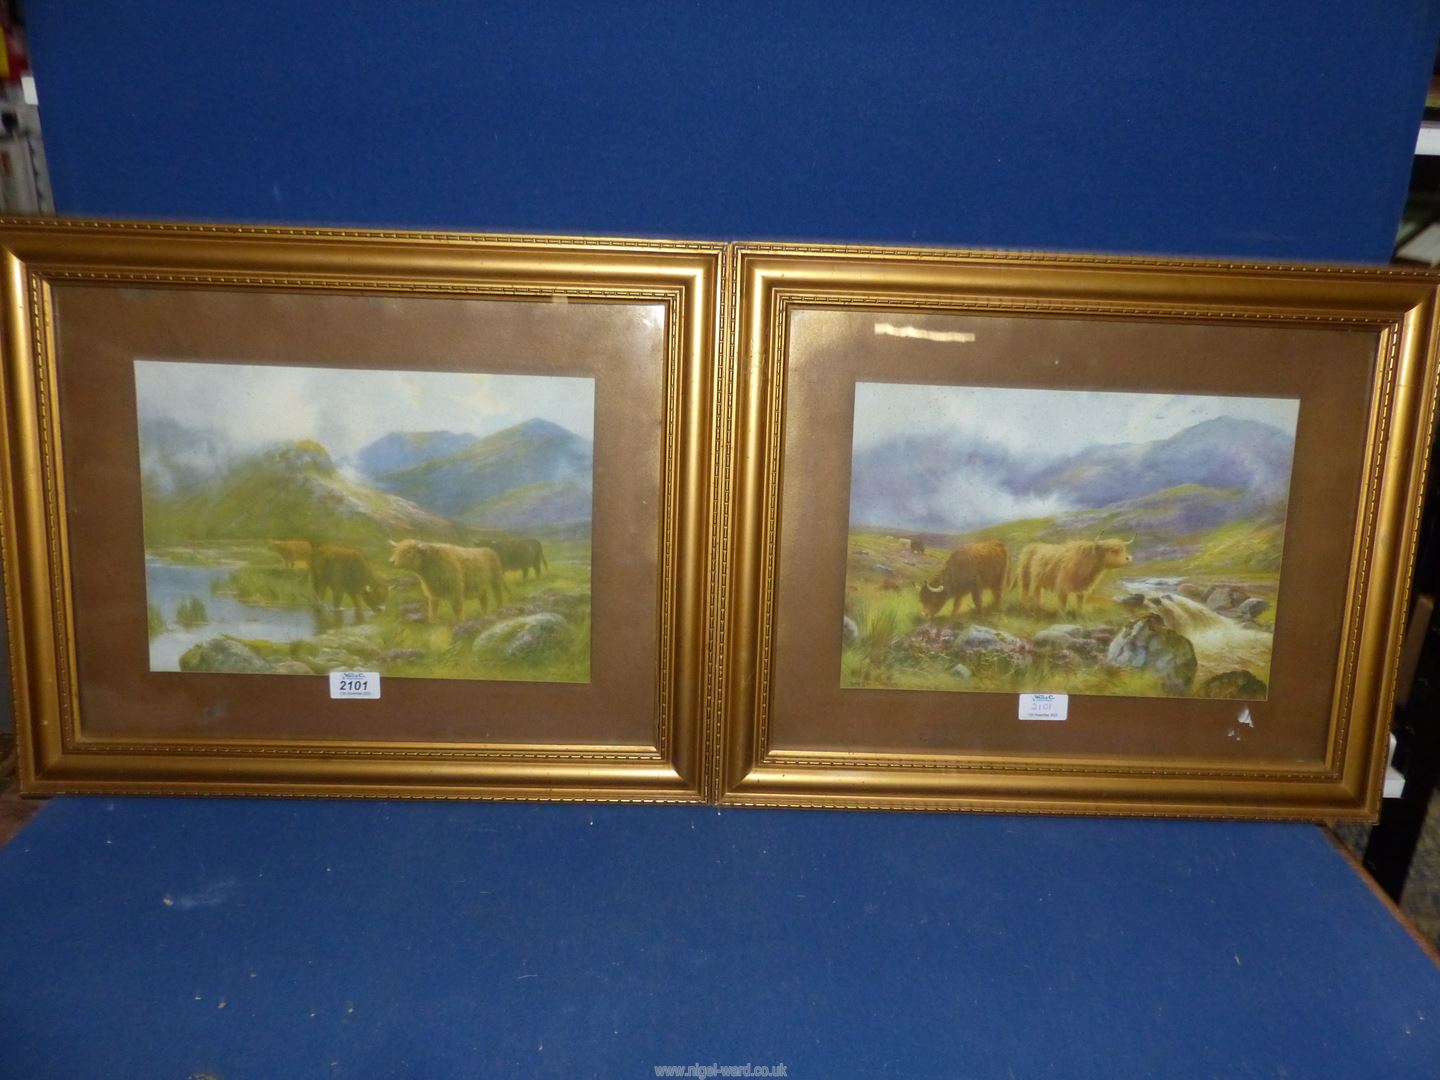 Two Victorian Prints - Douglas Cameron 1880-1910 "Highland Cattle".